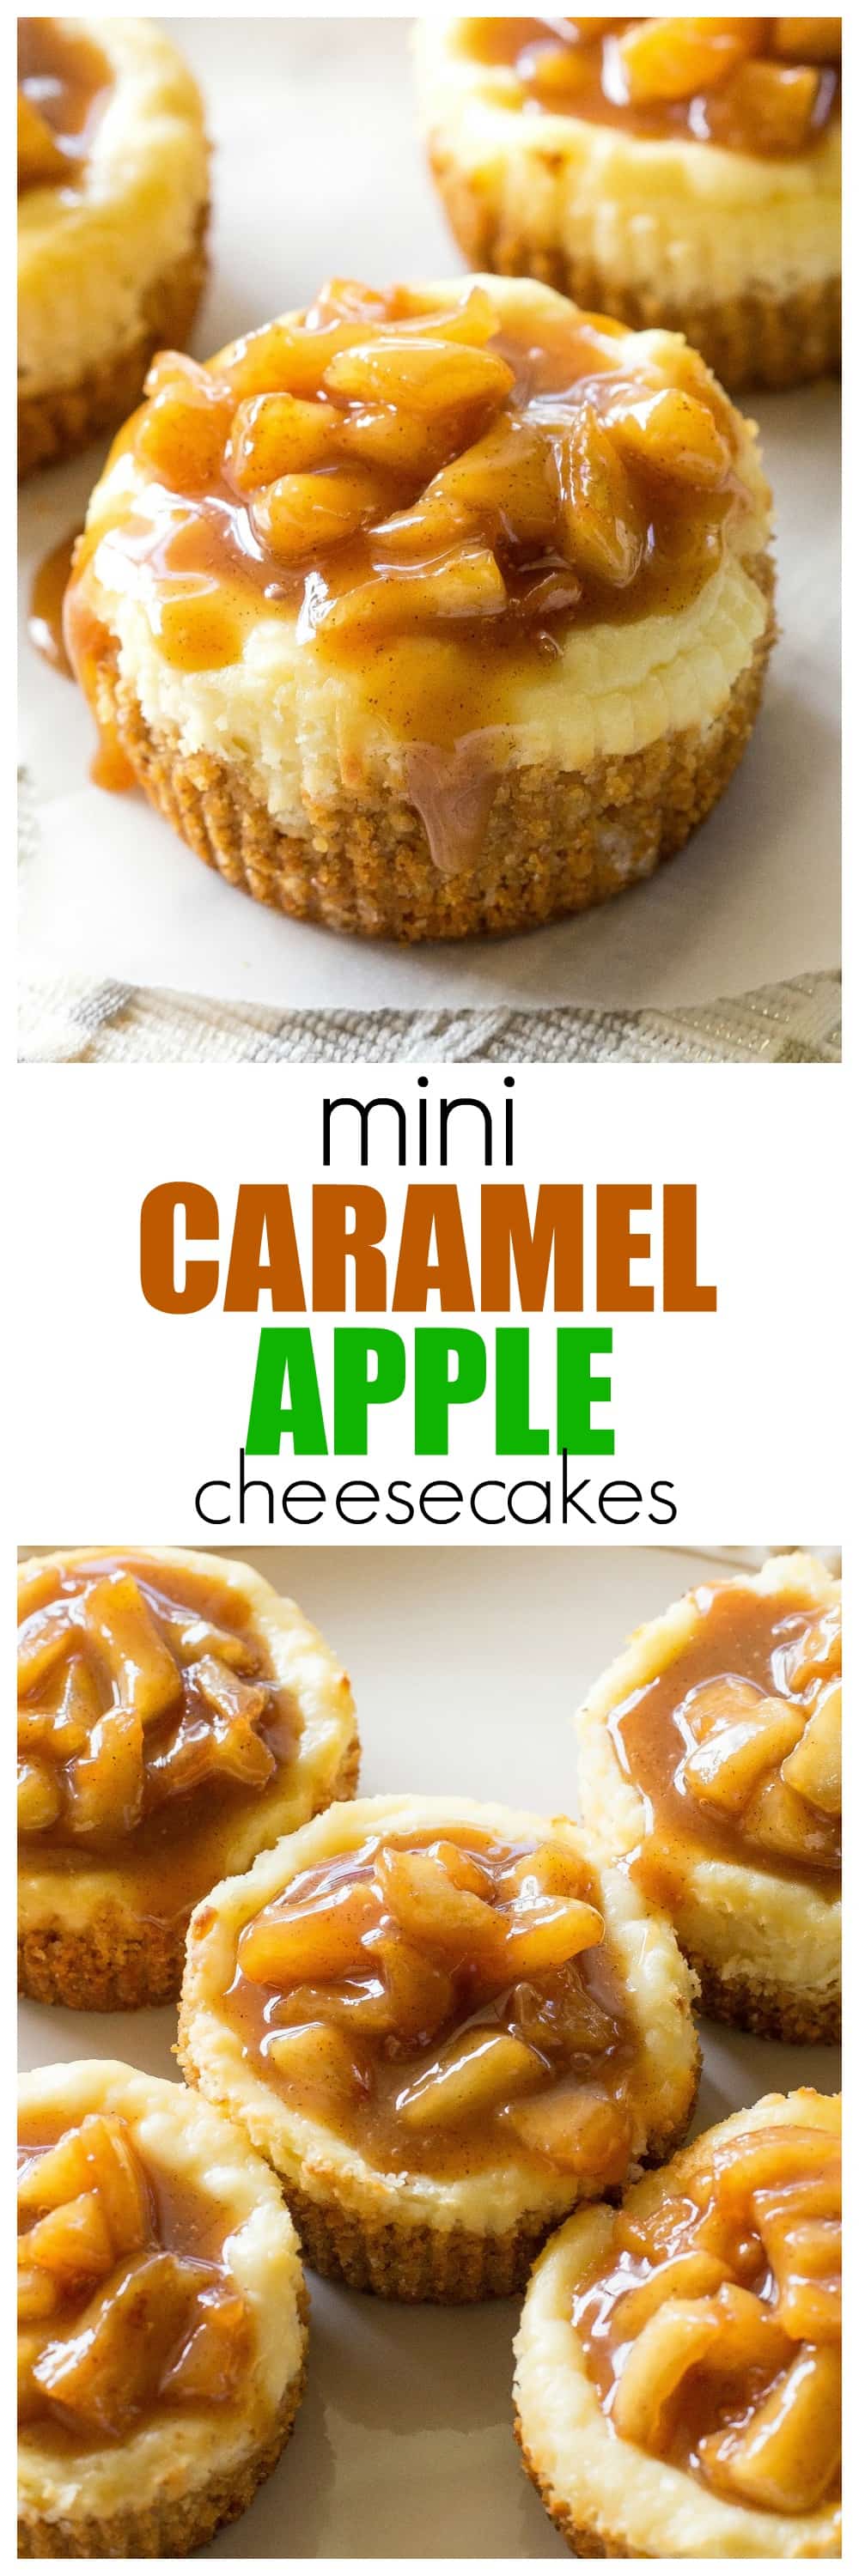 Mini Caramel Apple Cheesecakes - The Girl Who Ate Everything